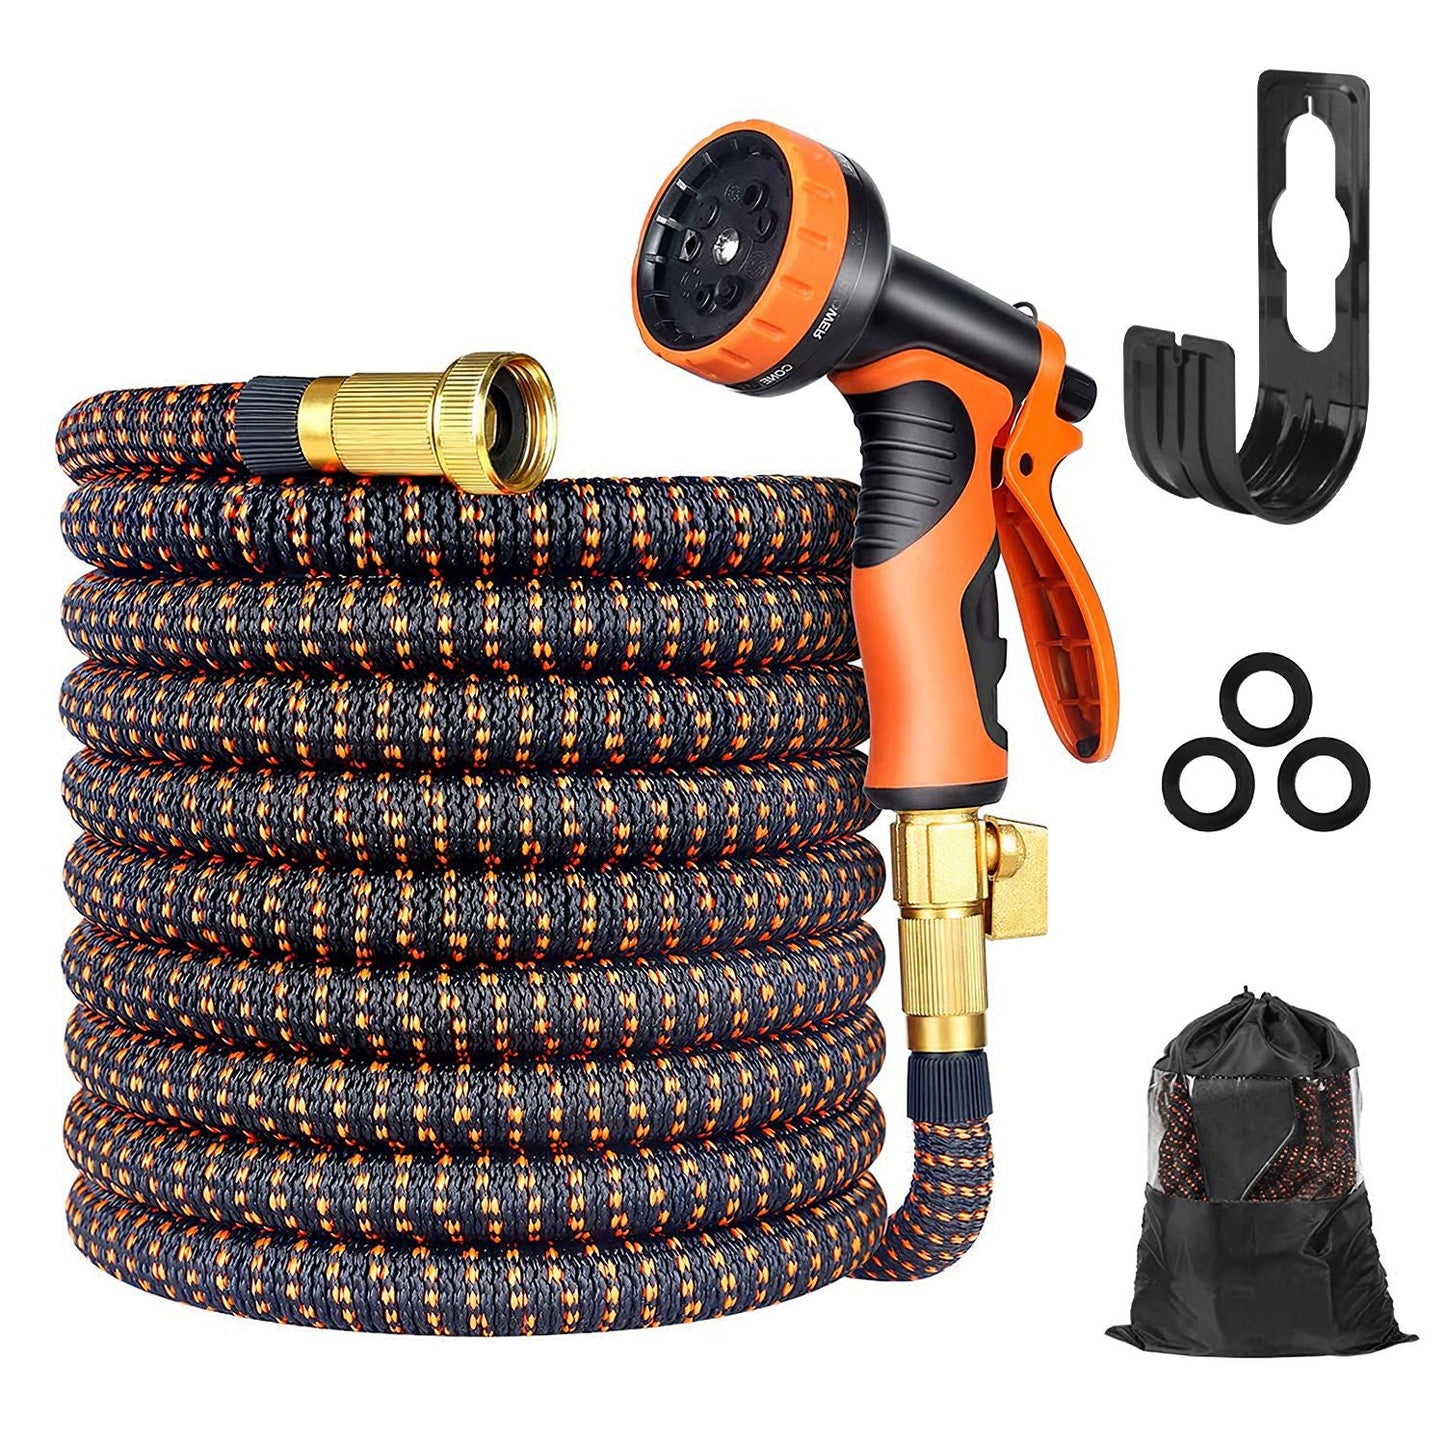 50FT/75FT/100FT Garden Hose Garden Watering Kit with Spray Nozzle Carry Bag Expandable Water Hose for Gardening Pet Bathing Ground Cleaning Car Wahing - Orange - 100ft by VYSN